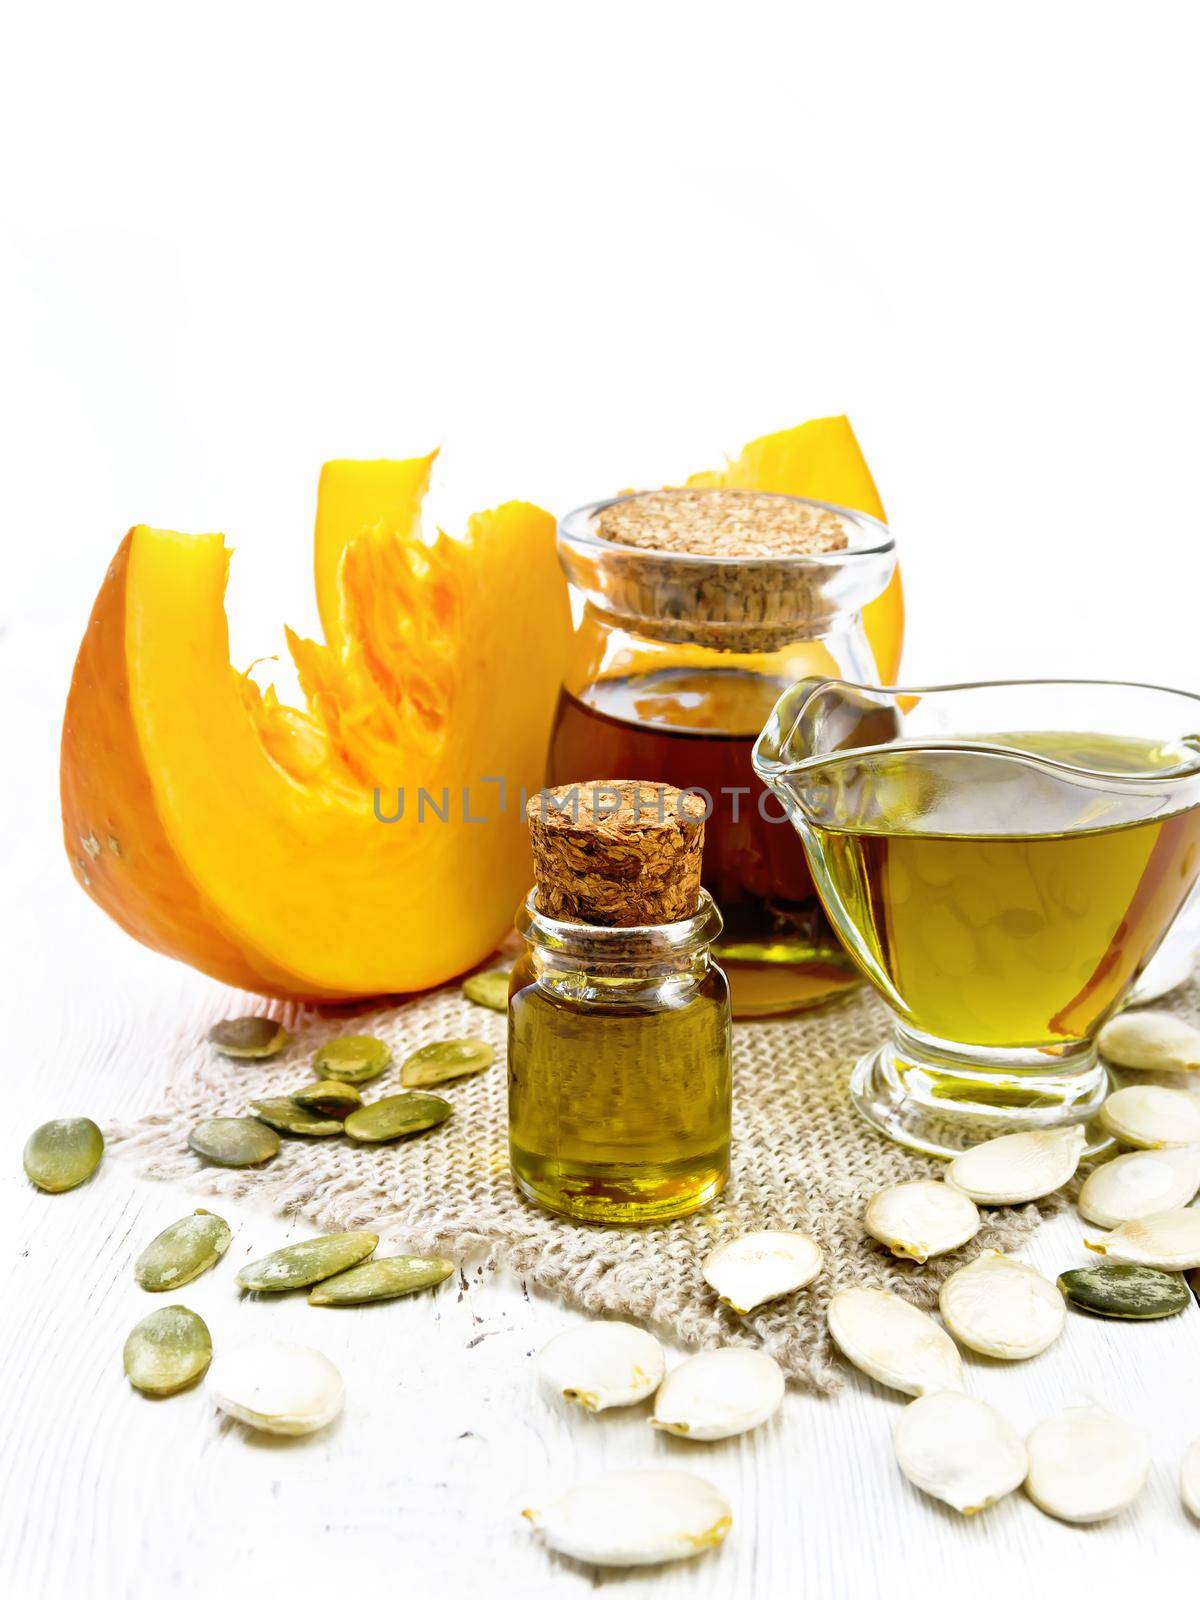 Pumpkin oil in a vial, gravy boat and a jar on burlap, seeds on the table, slices of vegetable on light wooden board background